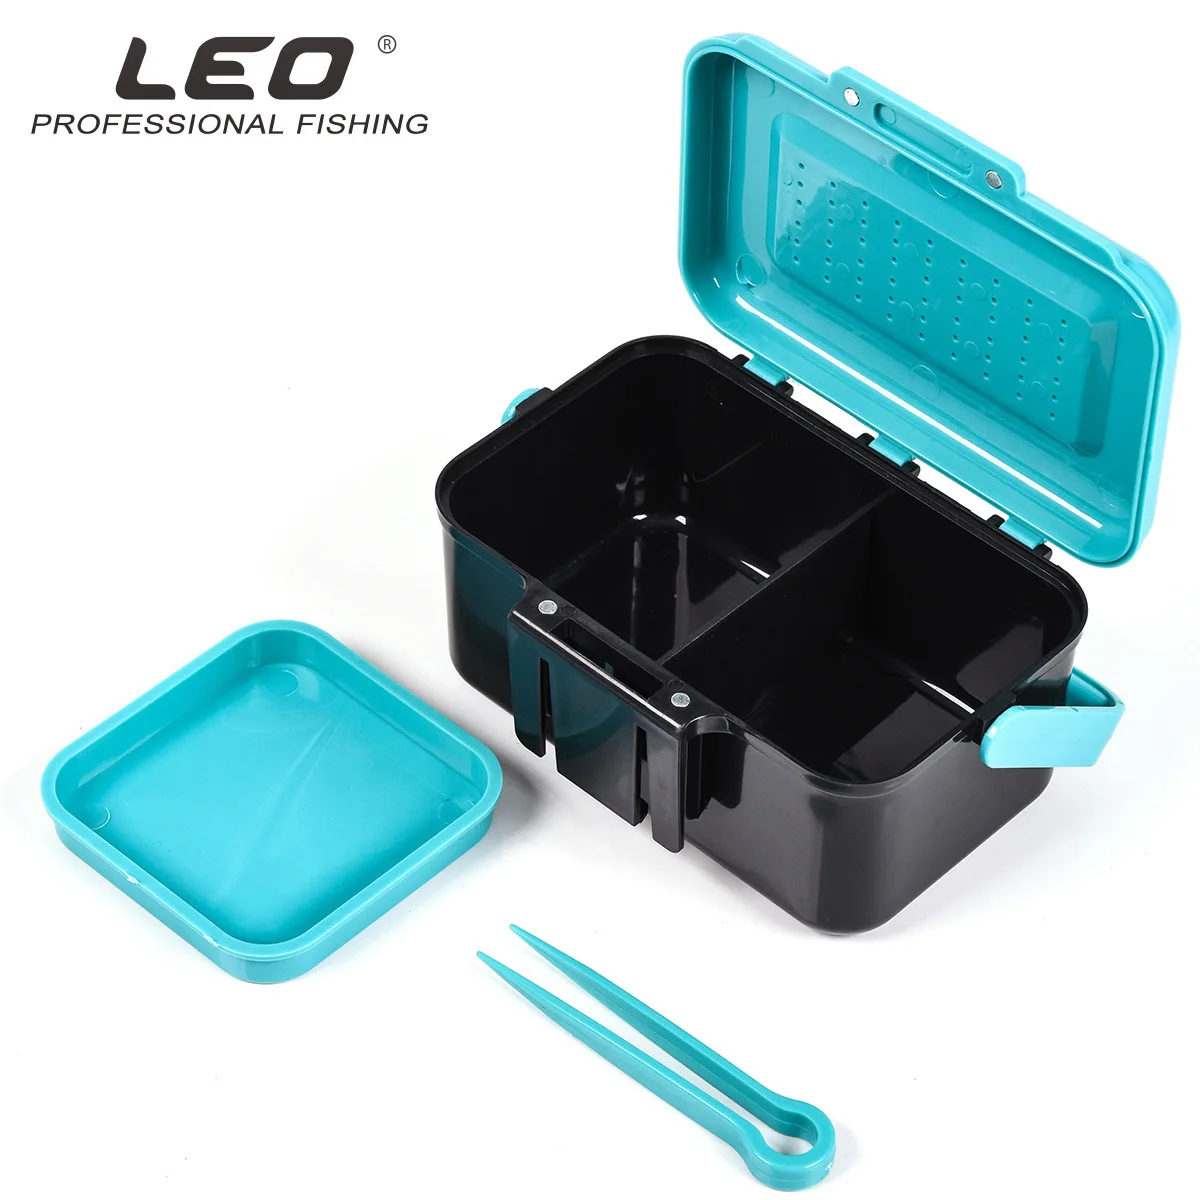 LEO ABS Plastic Fishing Box Tool 27778 Live Baits Case Earthworm Bait Worm Lure Tackle Storage Container Lures Hook | Спорт и